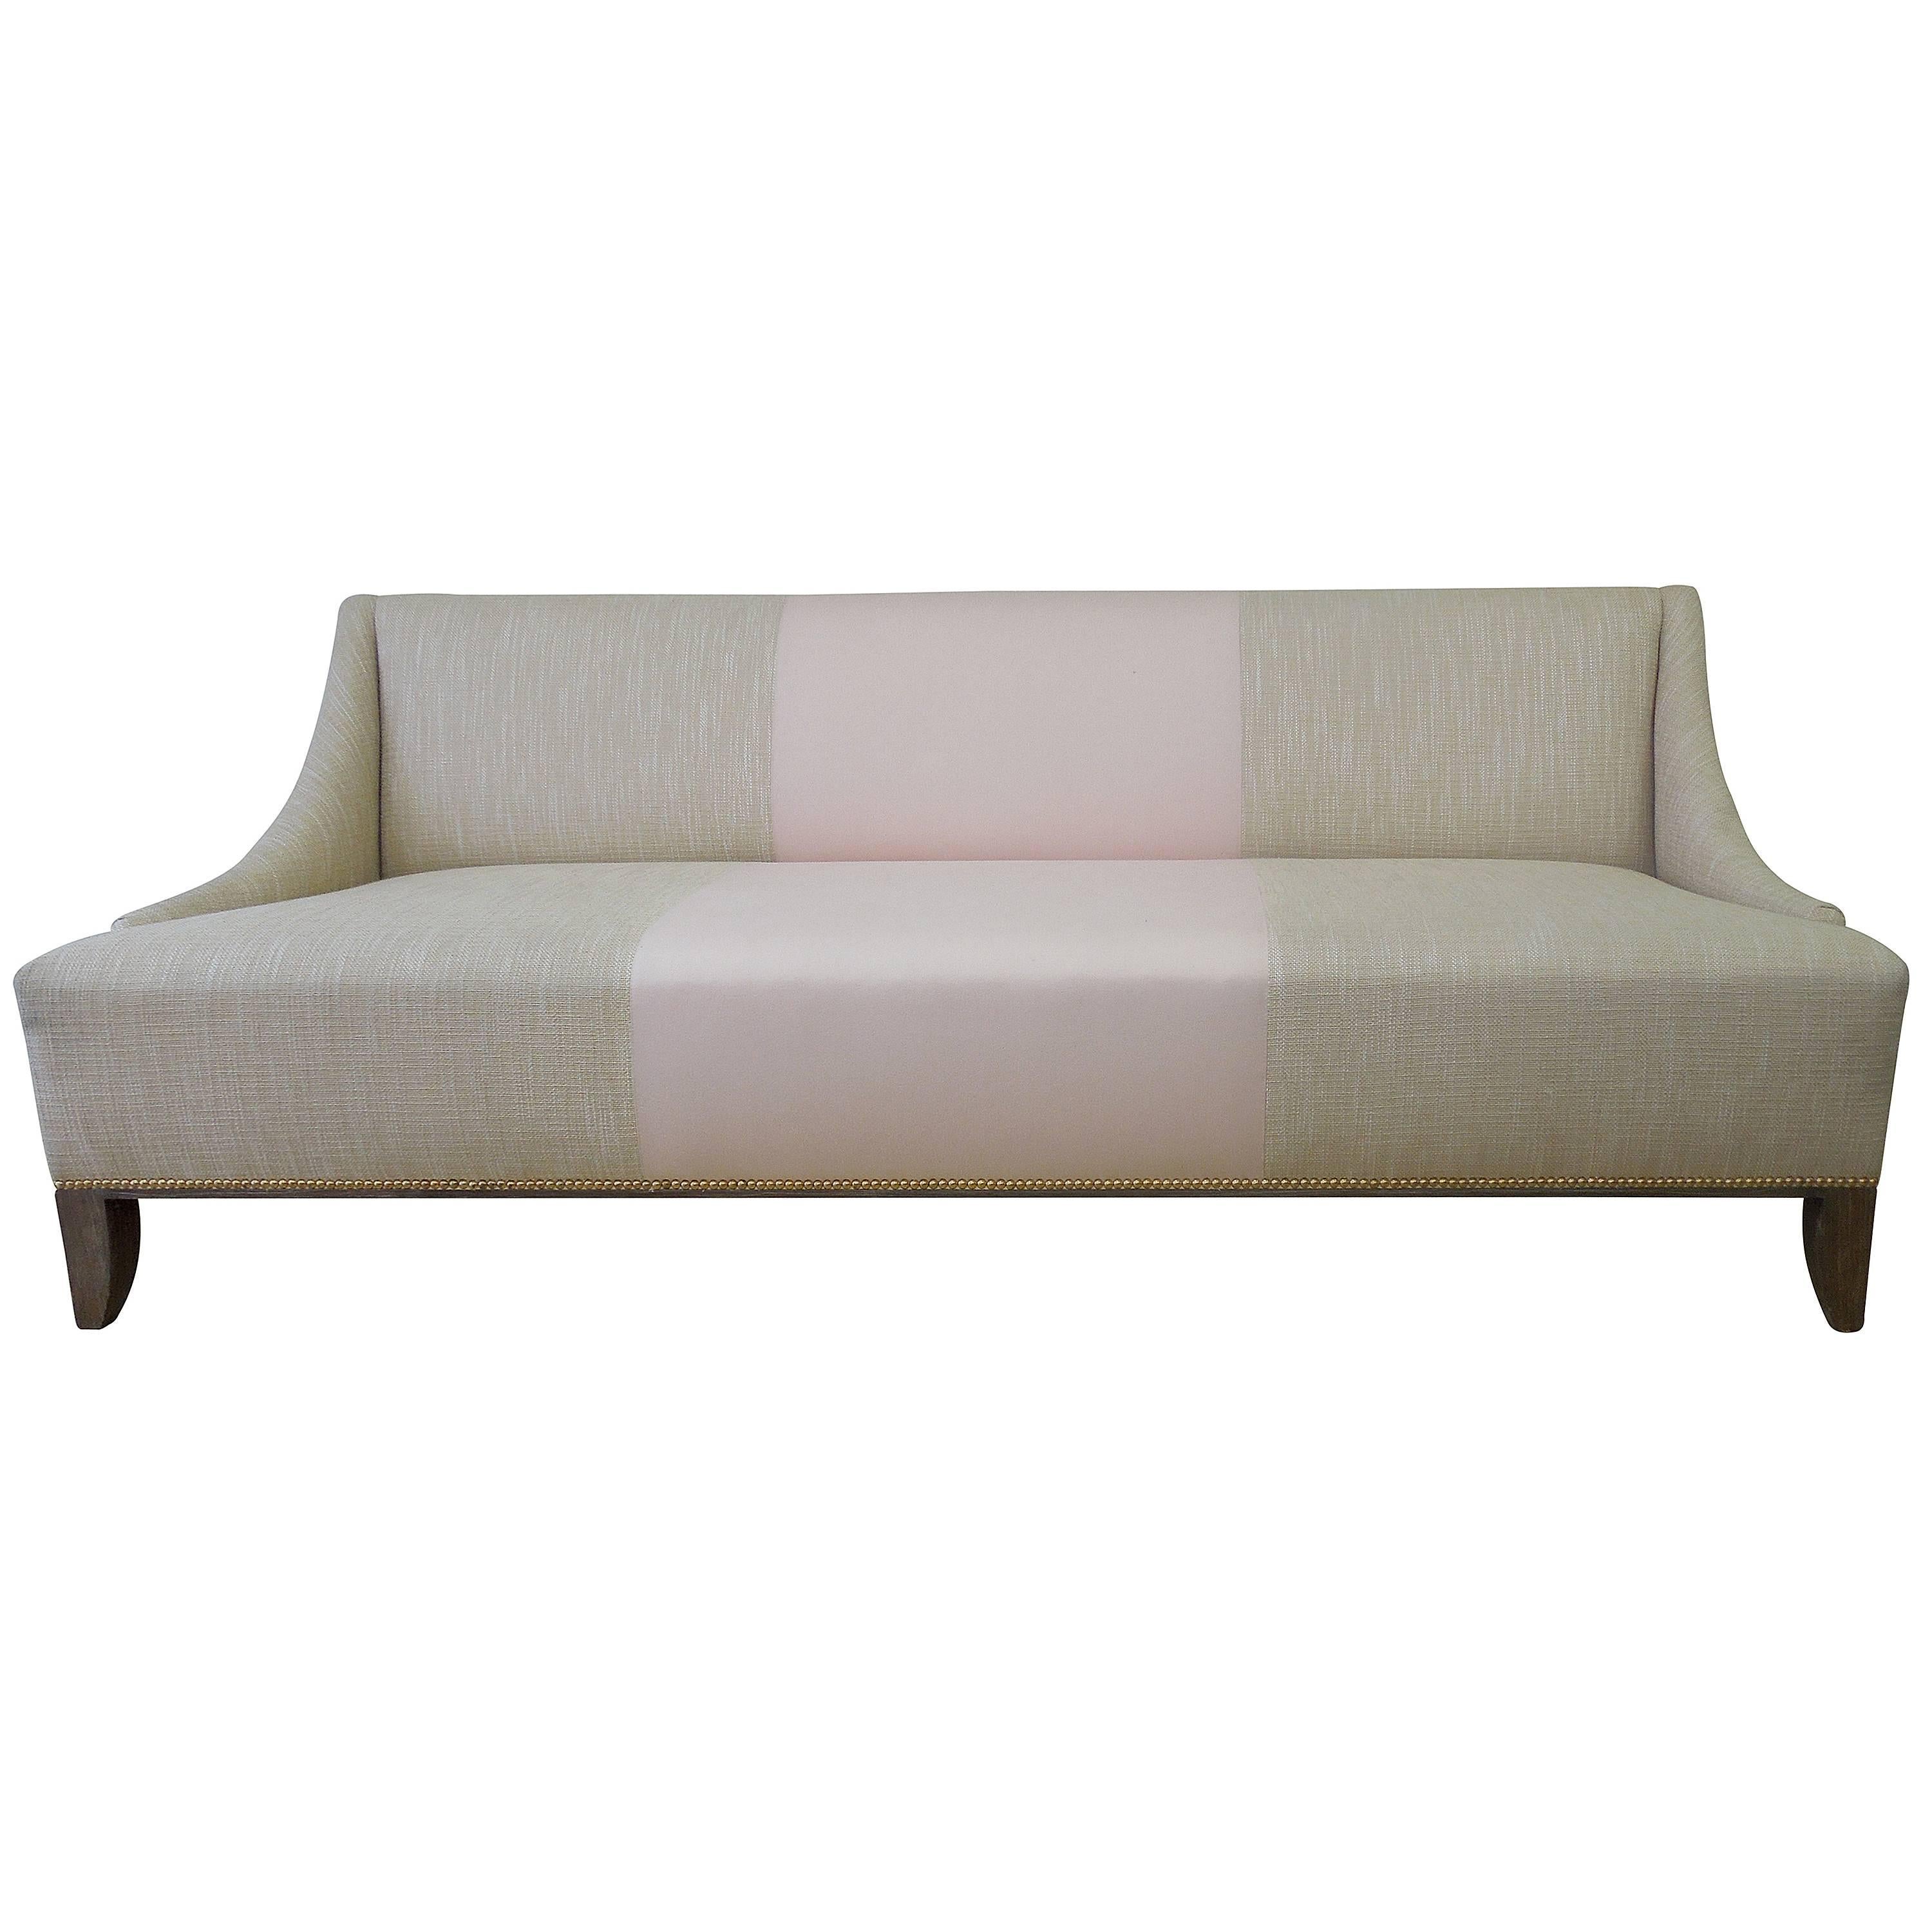 A custom-made modern tan linen and fashionista pink wool-blend sofa. Handmade in Los Angeles for designer residence. Brass nailhead trim. Beautiful grey or brown feet. Modern and very chic!